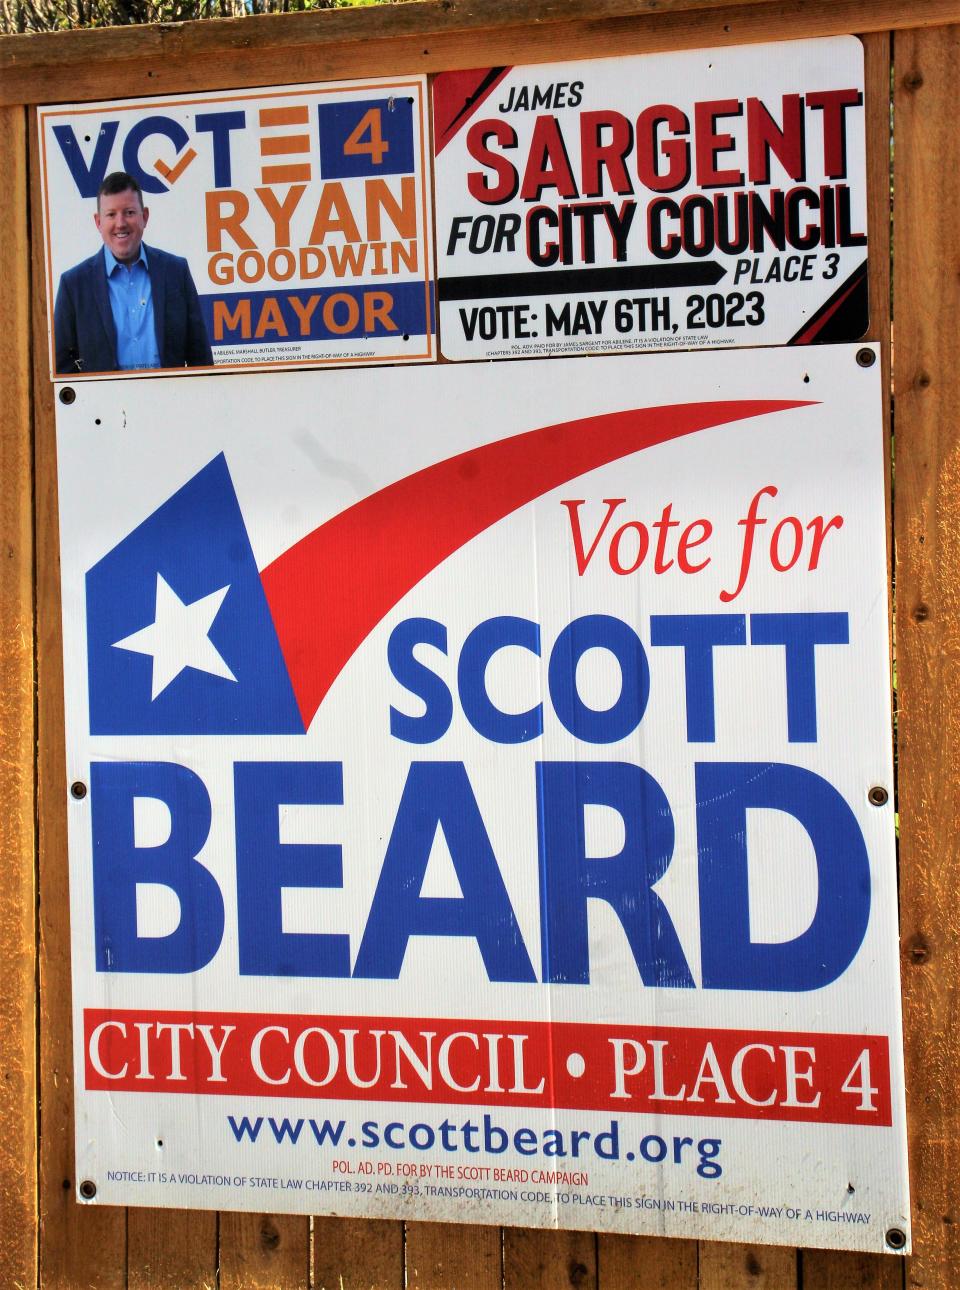 Campaign signs for Ryan Goodwin, James Sargent and Scott Beard are affixed to a fence at a home in southwest Abilene